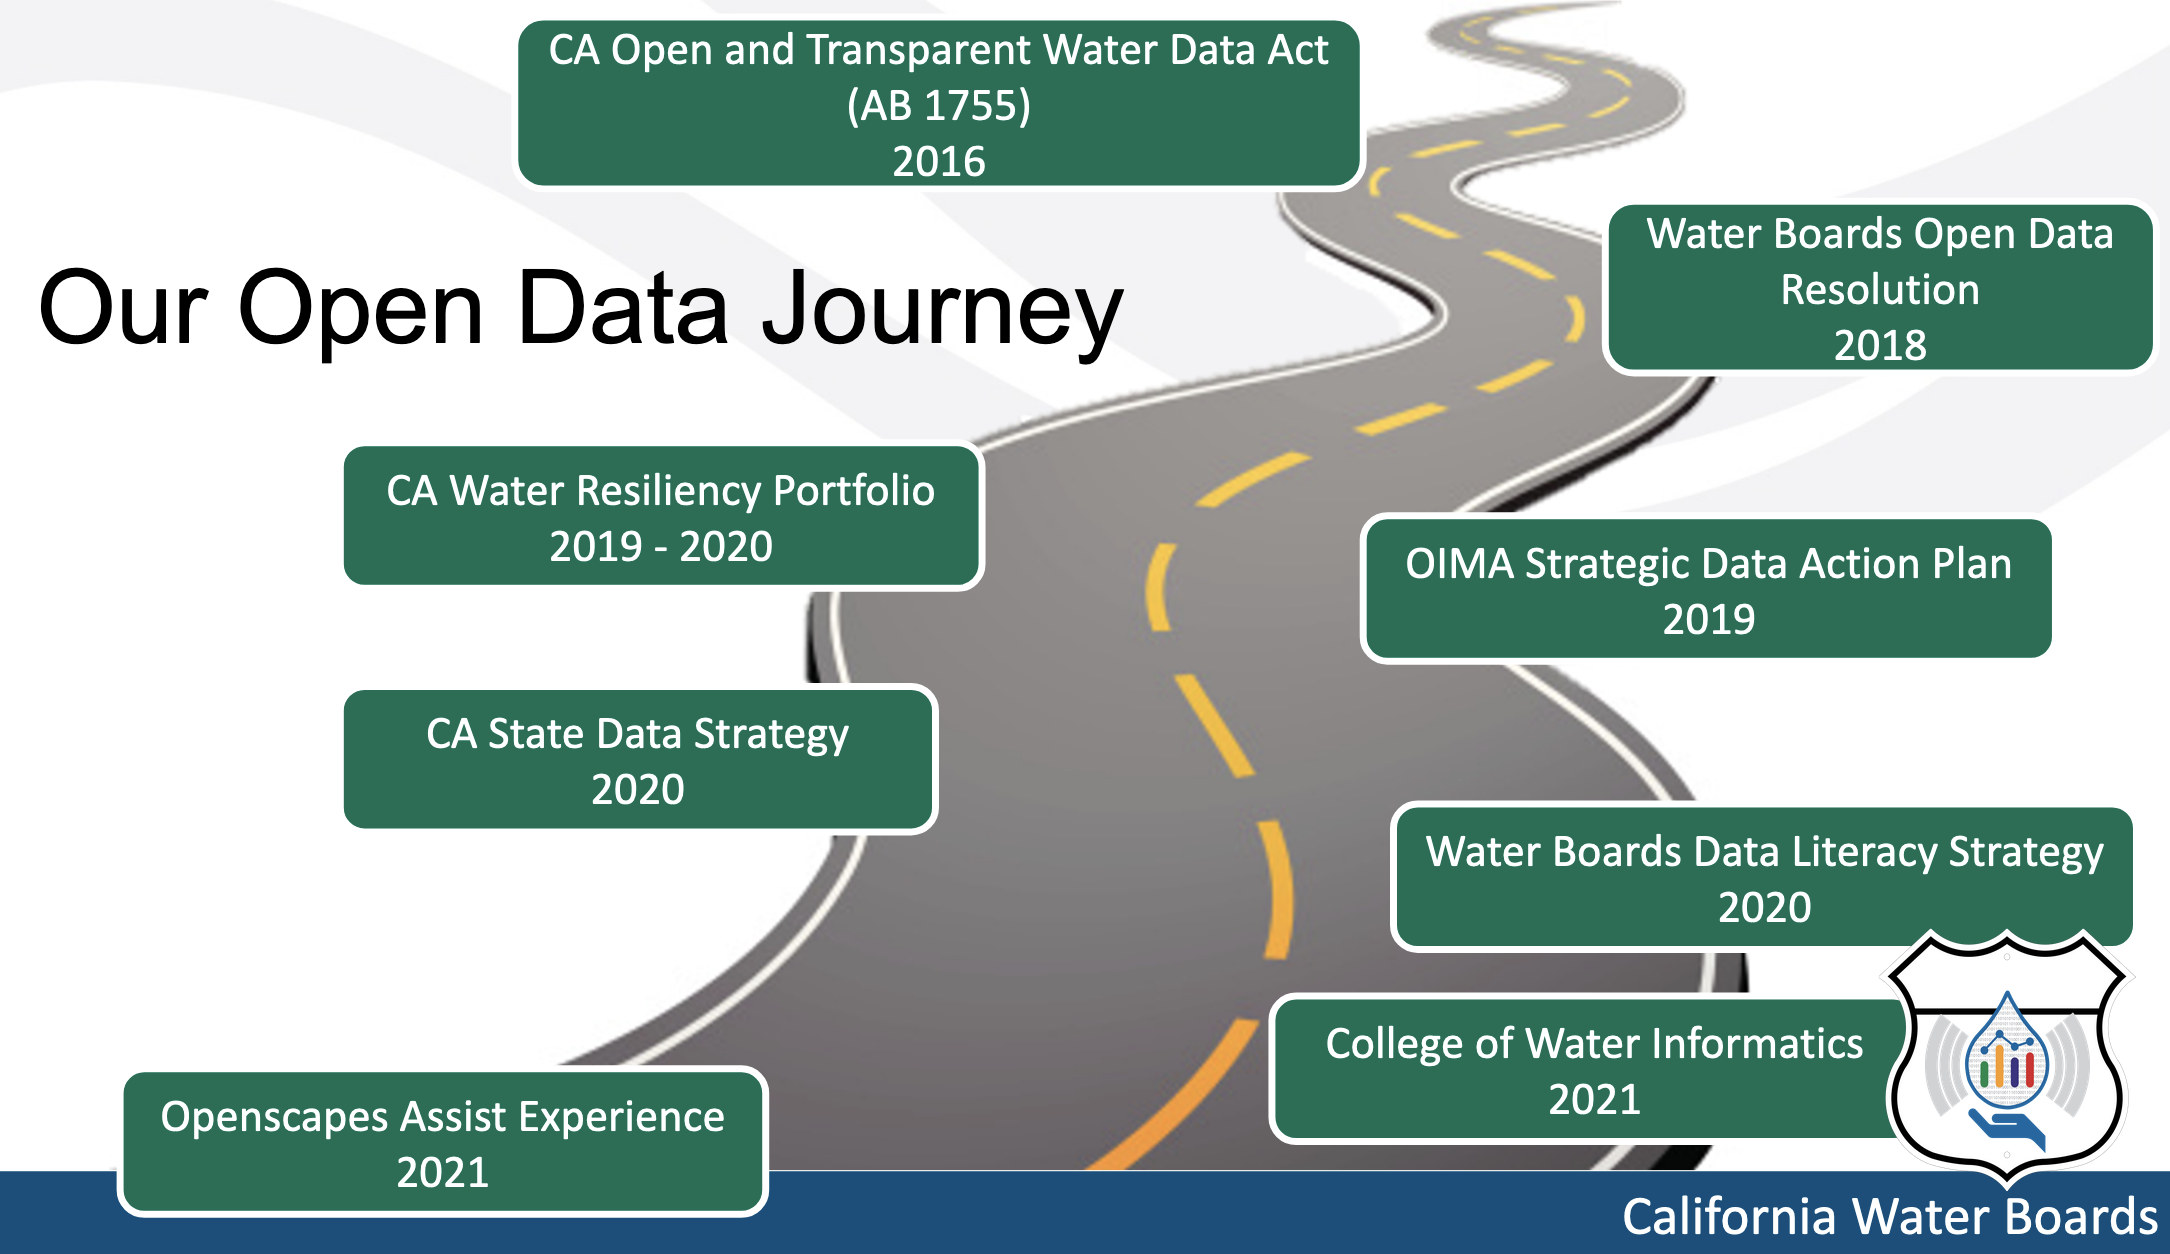 Slide summarizing key moments in the California Water Boards open data journey, with text boxes and dates overlaid on an image of a road. In 2016 - The California Open and Transparent Water Data Act (AB 1755) was enacted. In 2018 - the Water Board adopted its Open Data Resolution. From 2019-2020 - California published and began to implement its Water Resiliency Portfolio. In 2019 - The Water Board's Office of Information Management and Analysis (OIMA) published its Strategic Data Action Plan. In 2020 - California published and began to implement its State Data Strategy. In 2020 - OIMA published the Water Boards Data Literacy Strategy. In 2021 - OIMA launched the Water Boards College of Water Informatics to serve as a vehicle through which data literacy training and resources are delivered throughout the Water Boards. In 2021 - Members of OIMA partnered with Openscapes to assist with Champions cohorts and began to explore how Openscapes could contribute to and advance open science within the larger Water Boards organization.